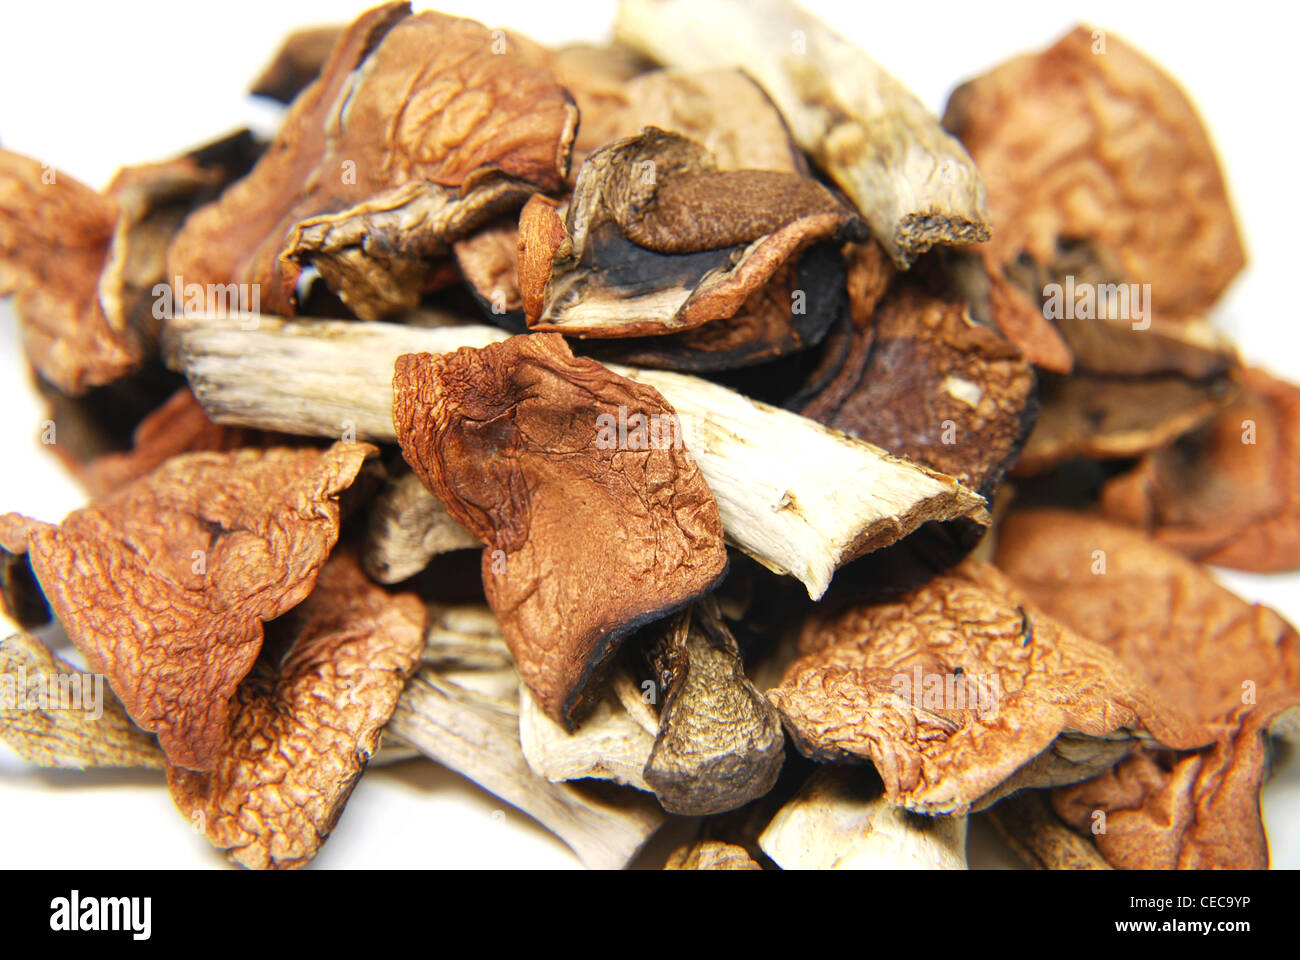 background, brown, closeup, dried, flora, food, fungi, fungus, ingredient, isolated, mushrooms, organic, raw, vegetable, Stock Photo